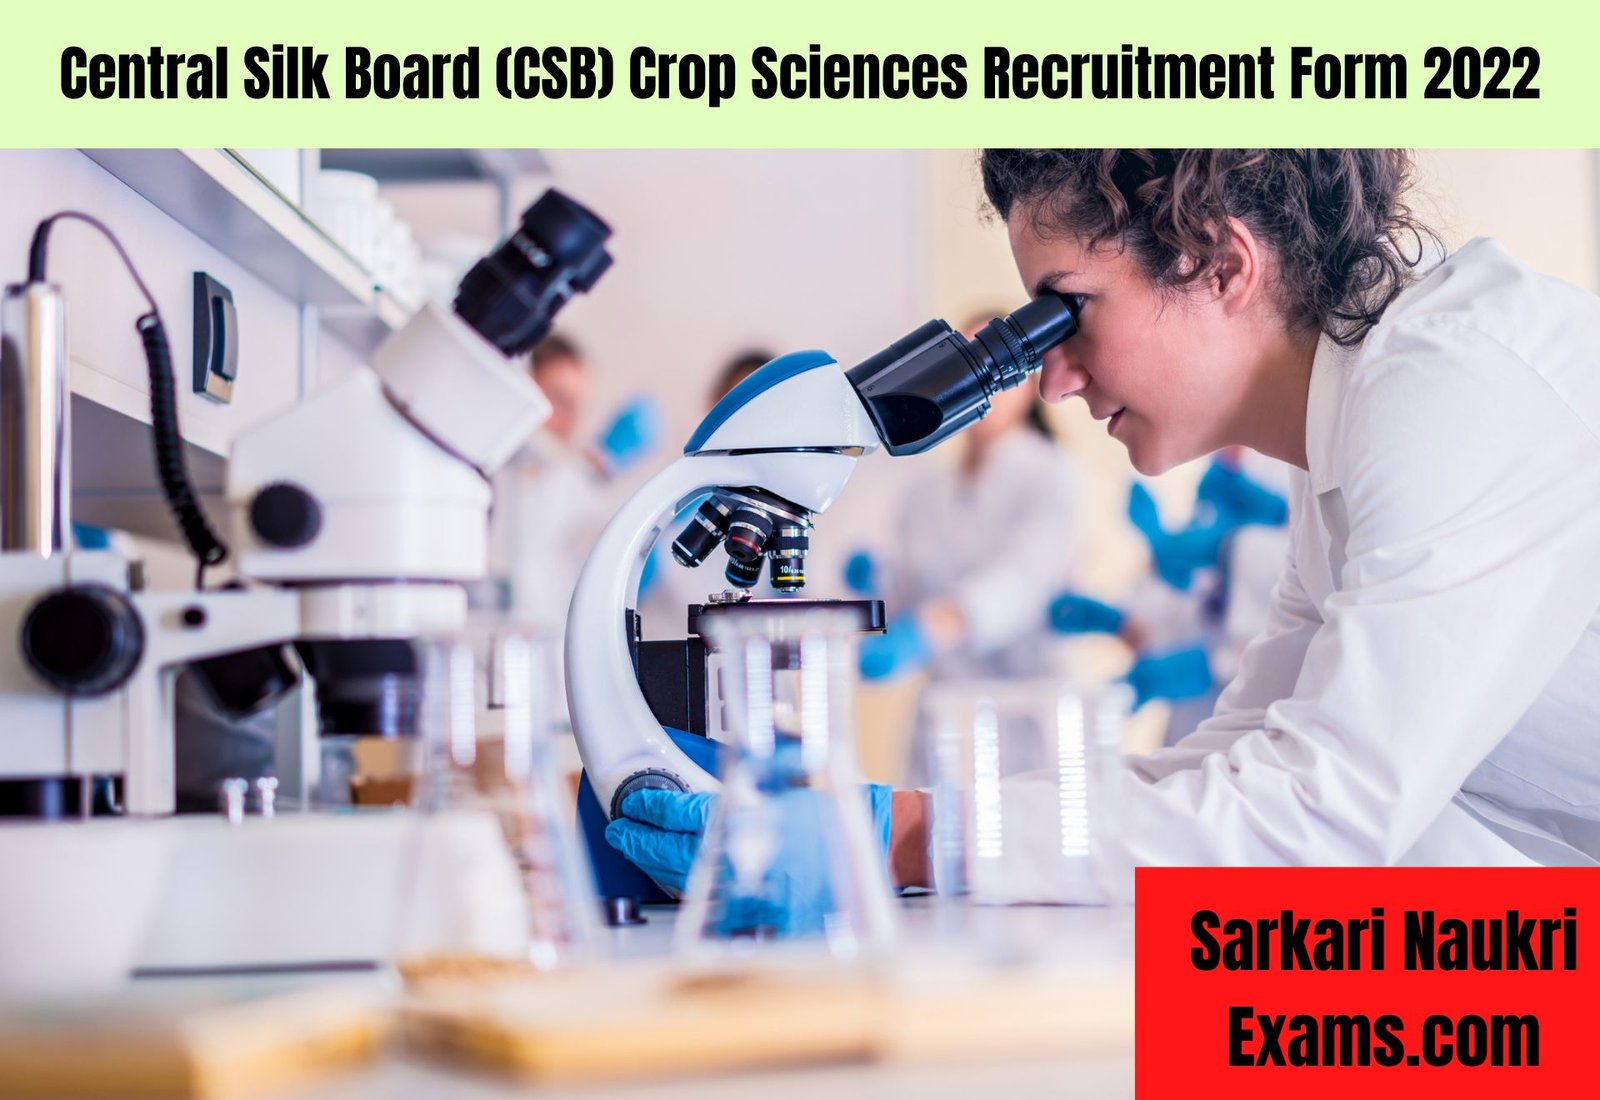 Central Silk Board (CSB) Crop Sciences Recruitment Form 2022 | Interview Based Job